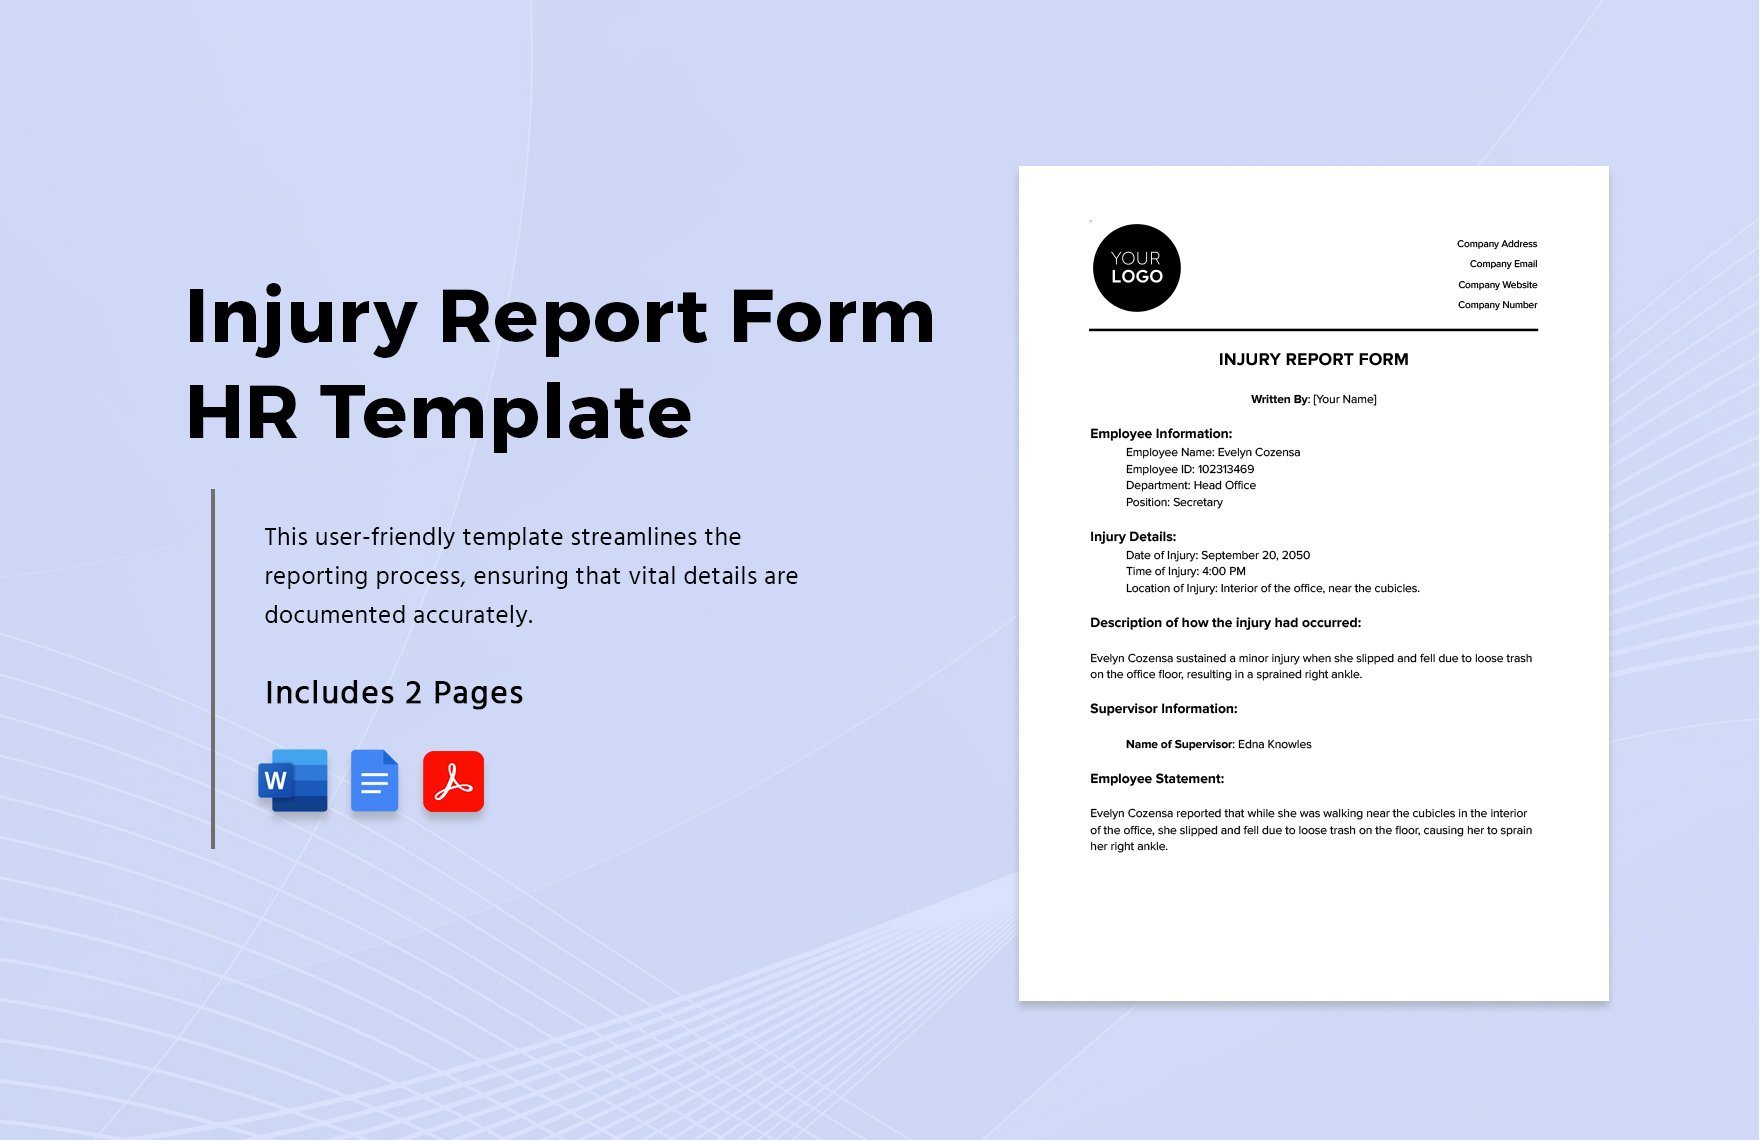 Injury Report Form HR Template in Word, Google Docs, PDF